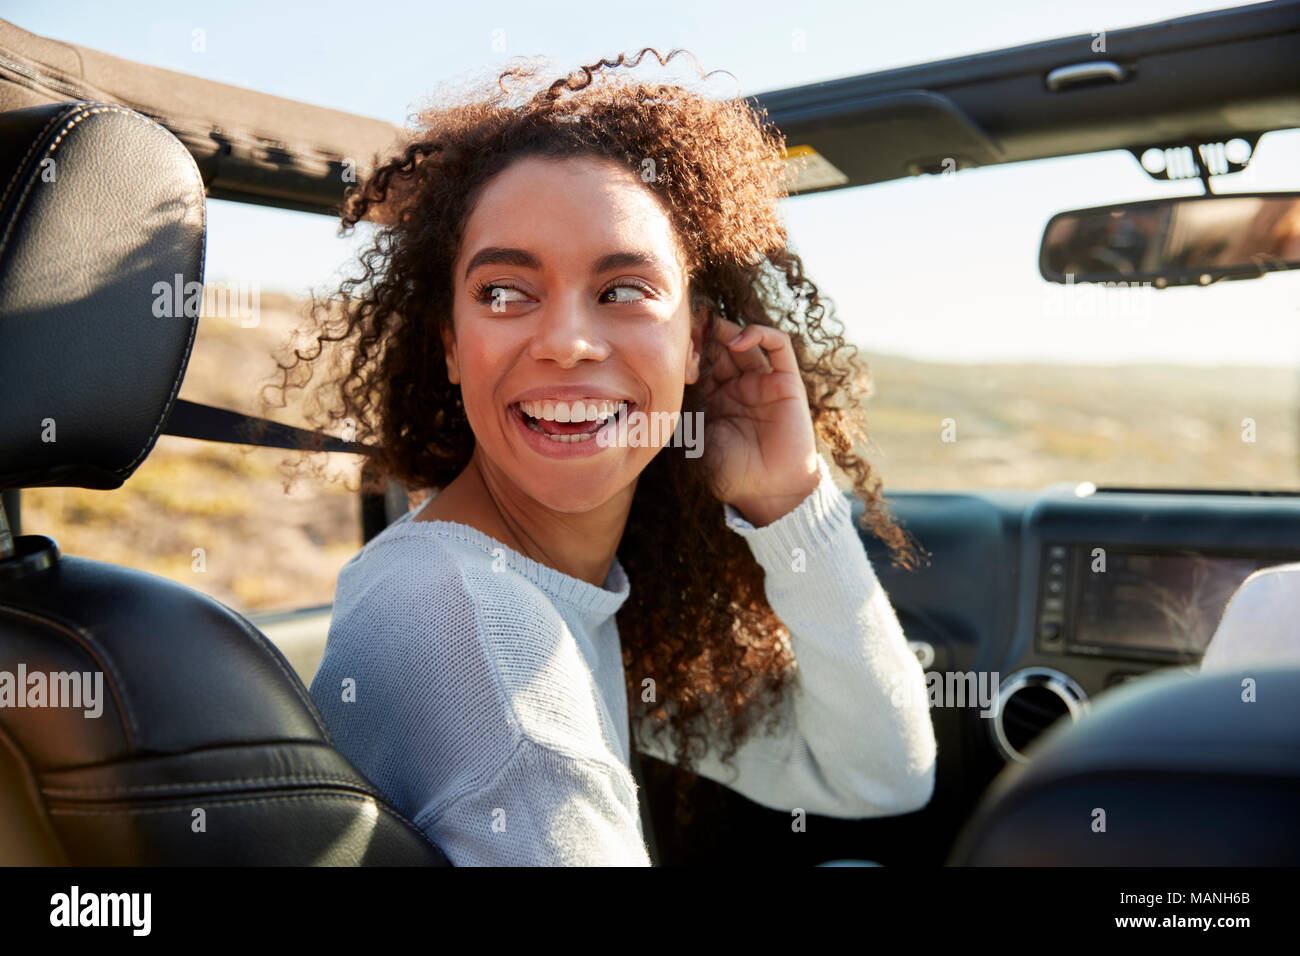 Young woman turning round in front passenger seat of a car Stock Photo